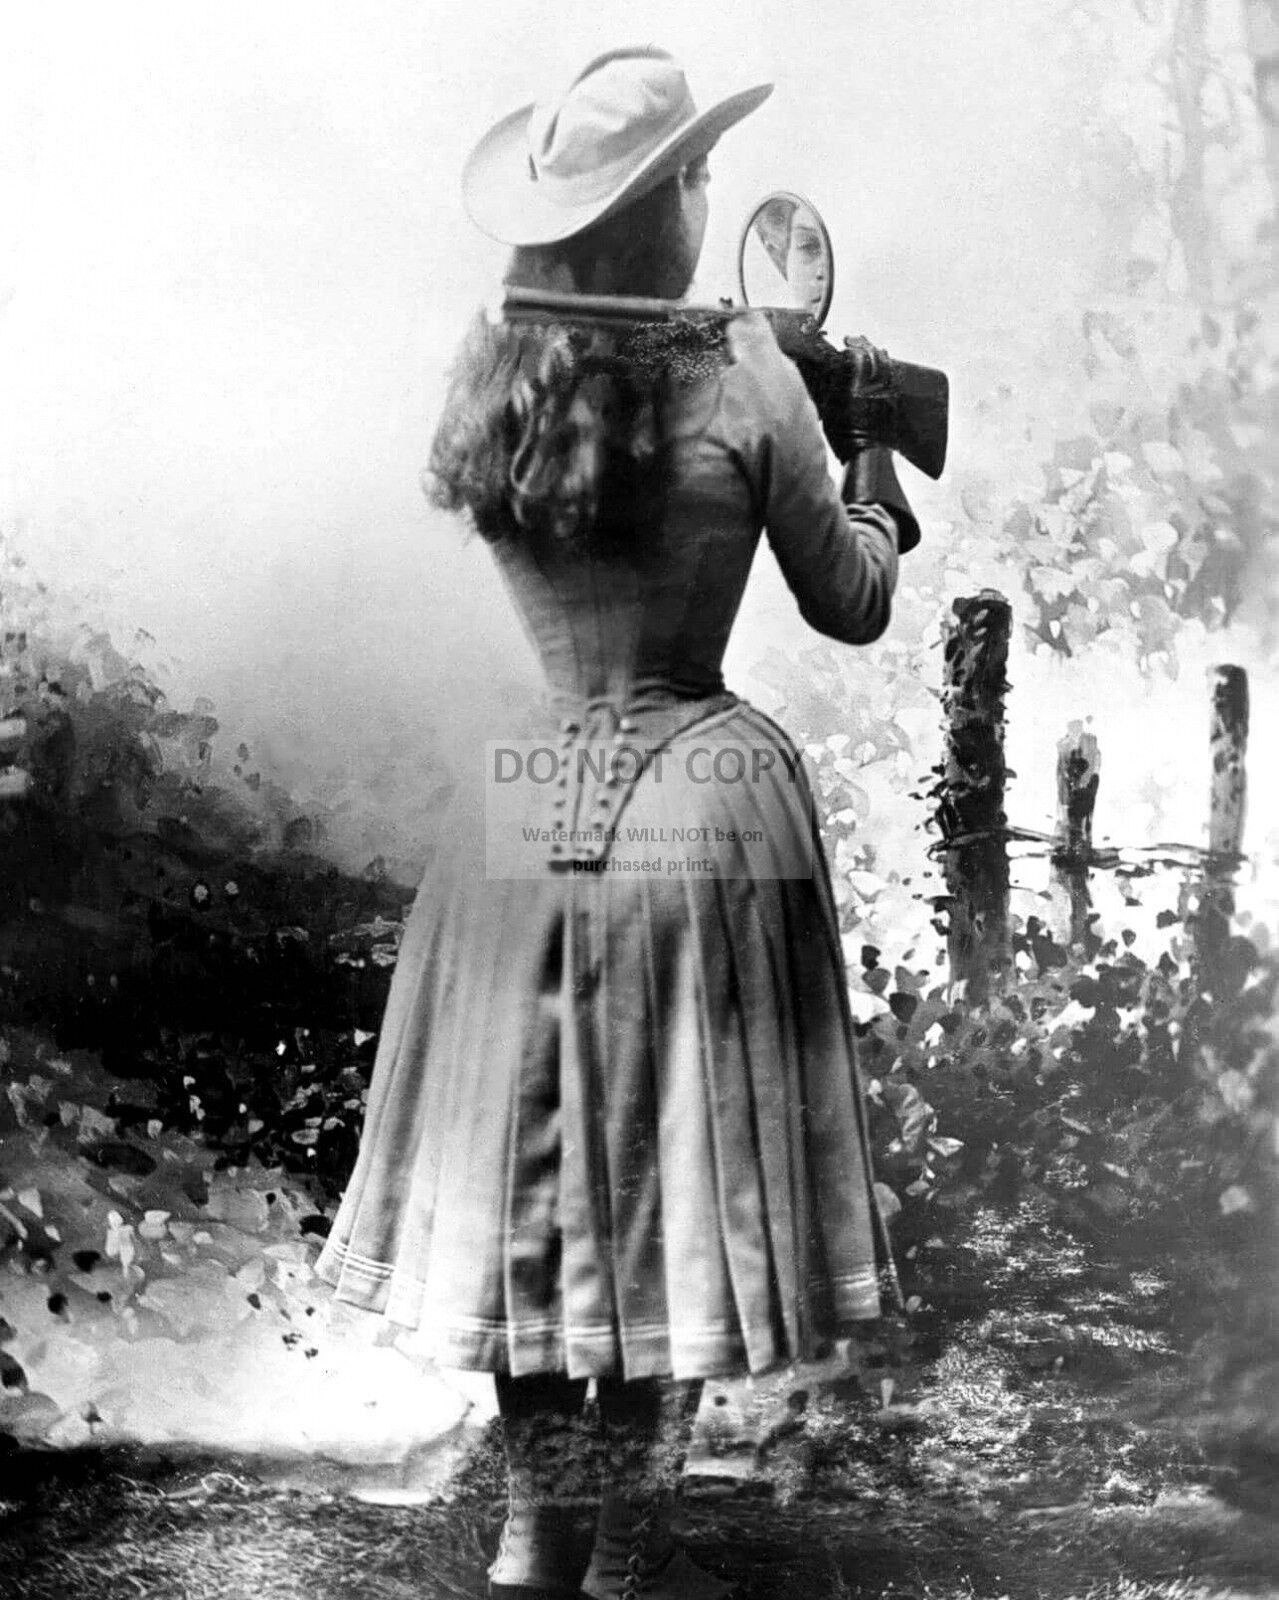 ANNIE OAKLEY AMERICAN SHARPSHOOTER EXHIBITION SHOOTER - 8X10 PHOTO (FB-576)